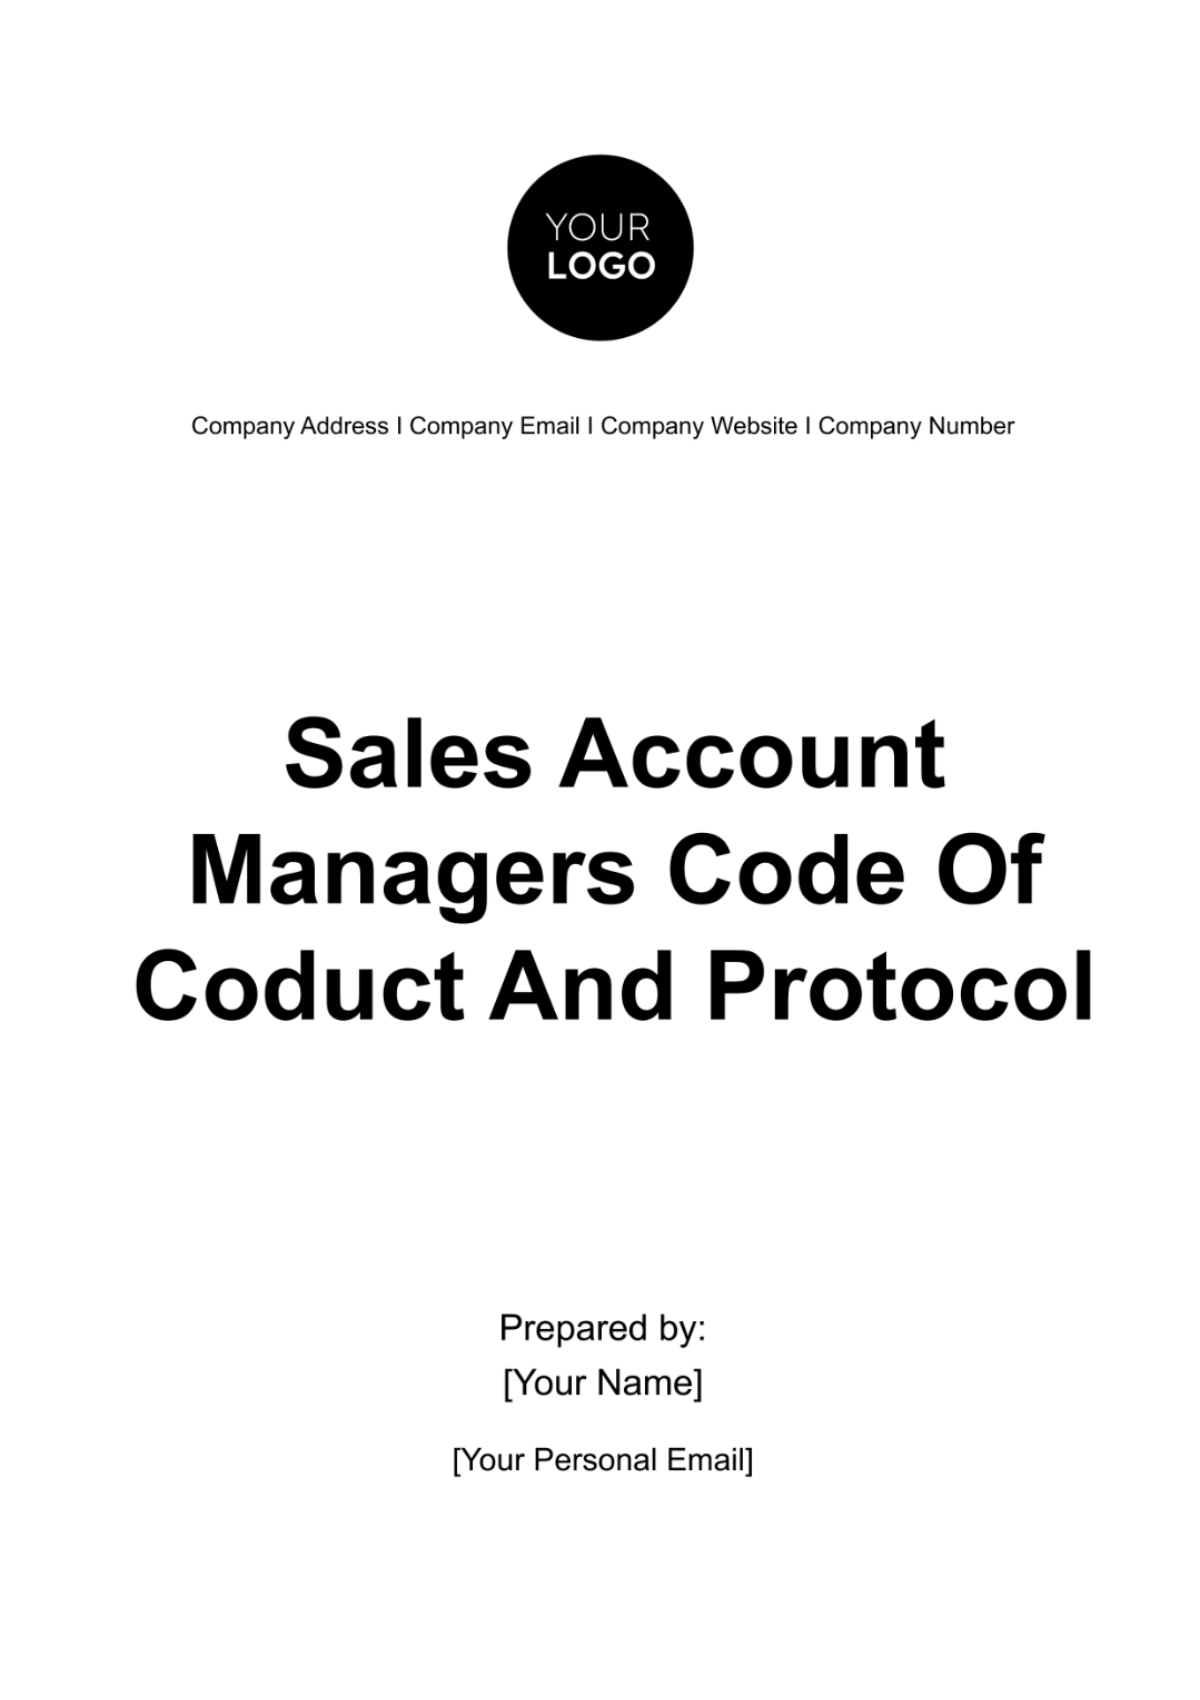 Sales Account Manager's Code of Conduct and Protocol Template